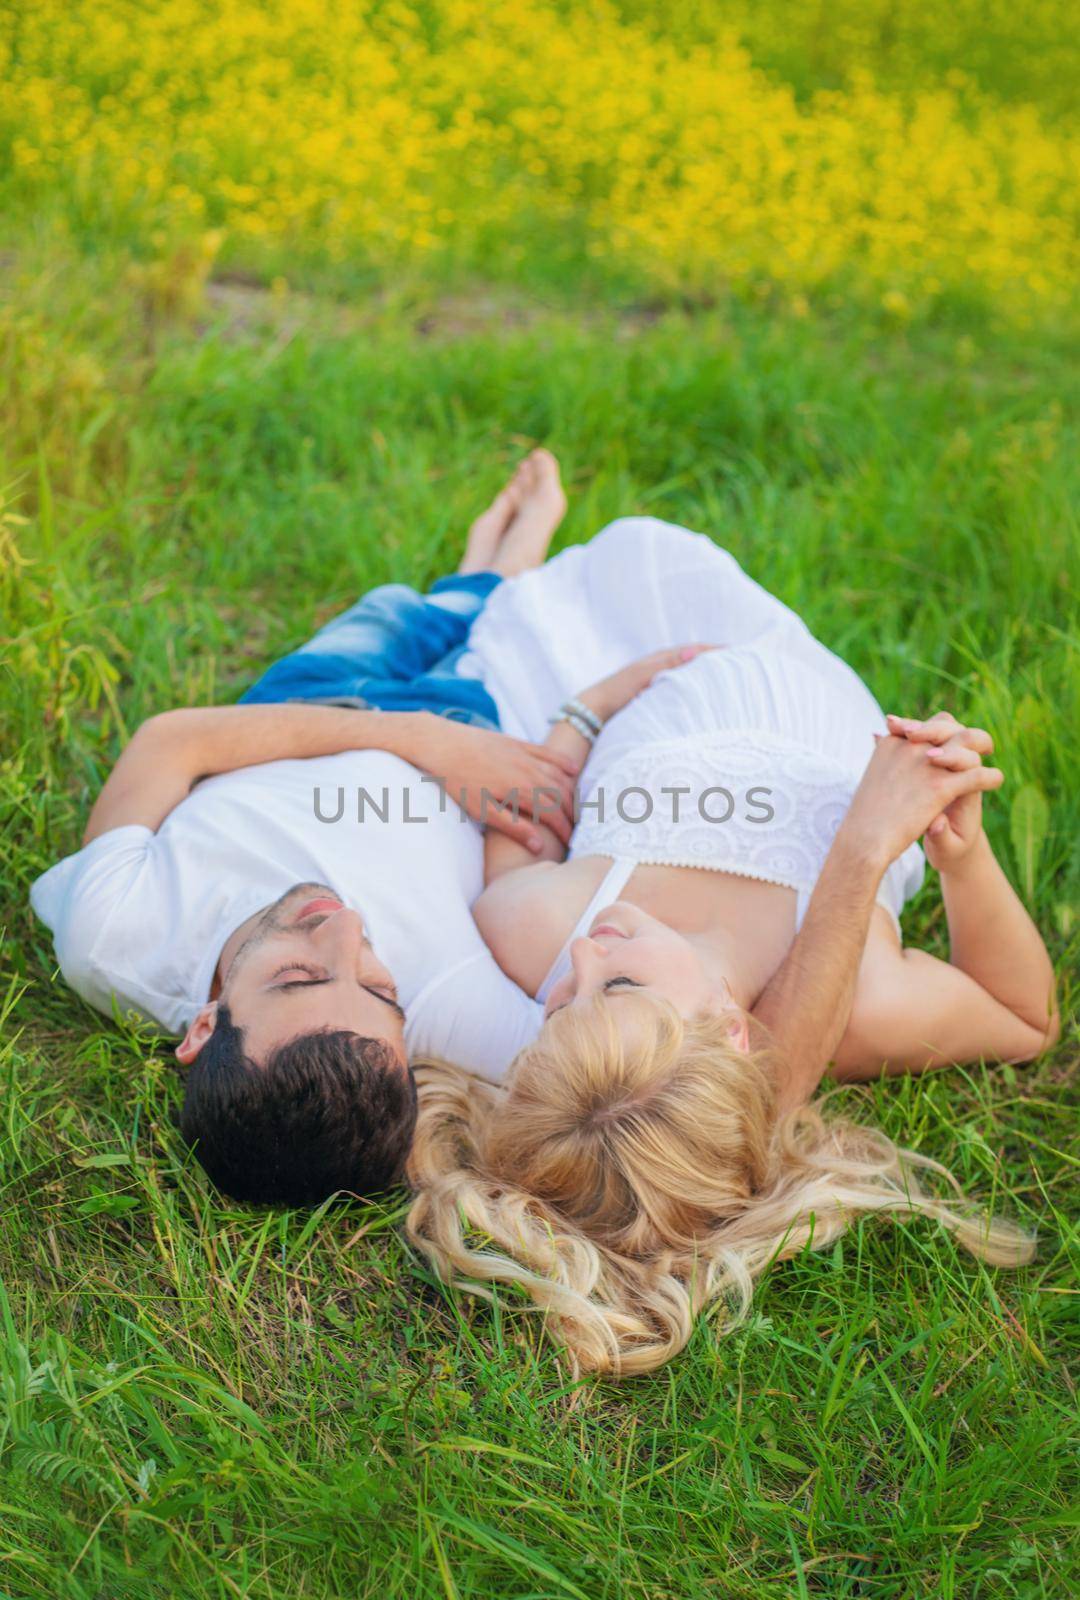 Pregnant woman and man photo shoot lie on the grass. Selective focus. by yanadjana